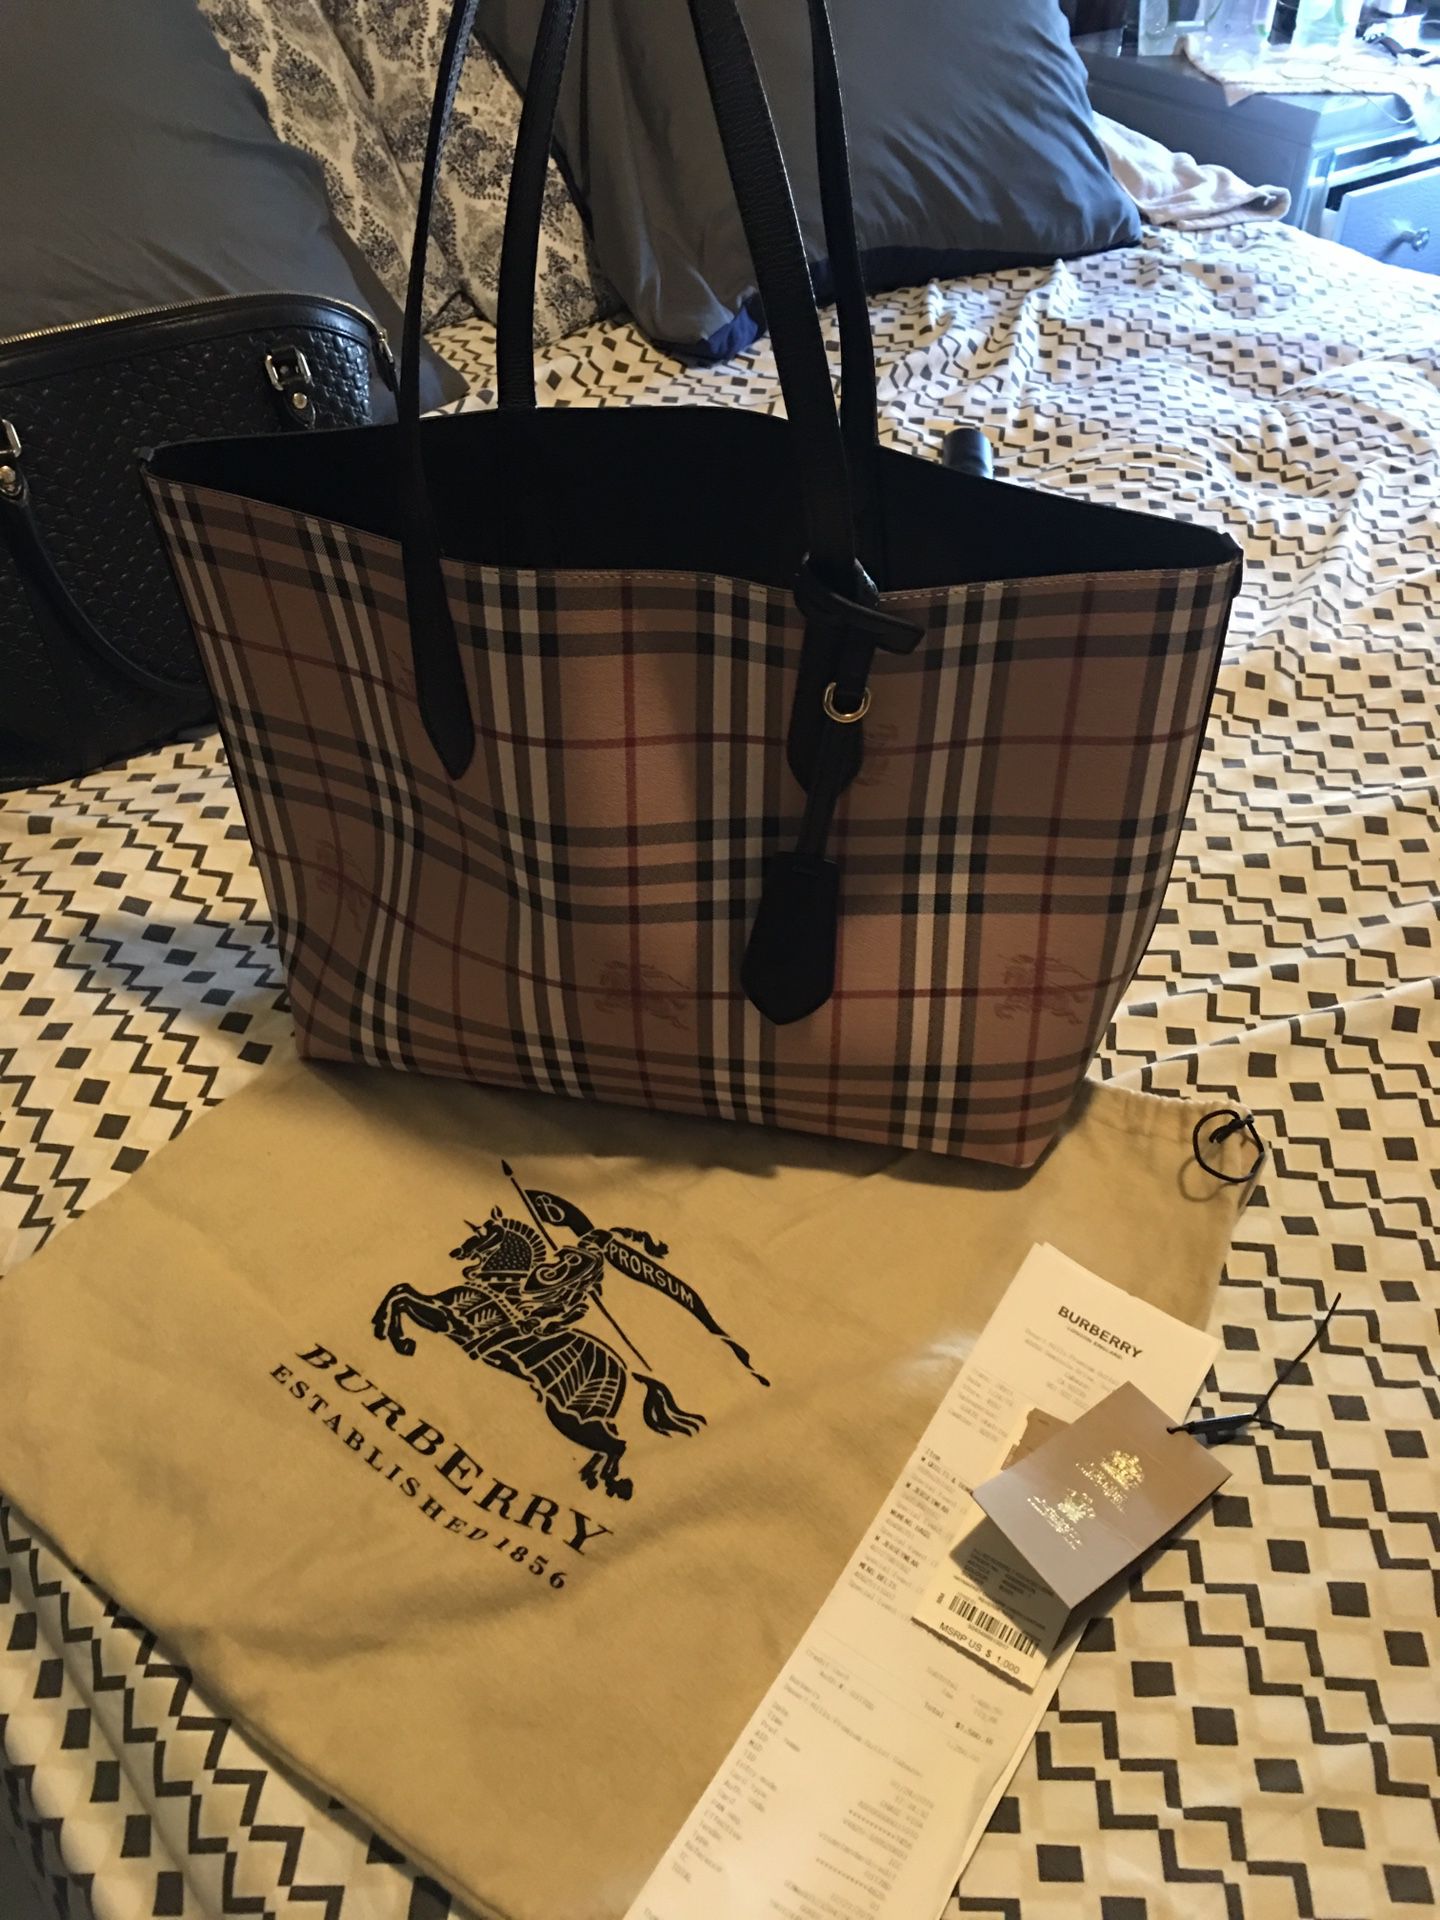 Burberry tote 👜 large bag